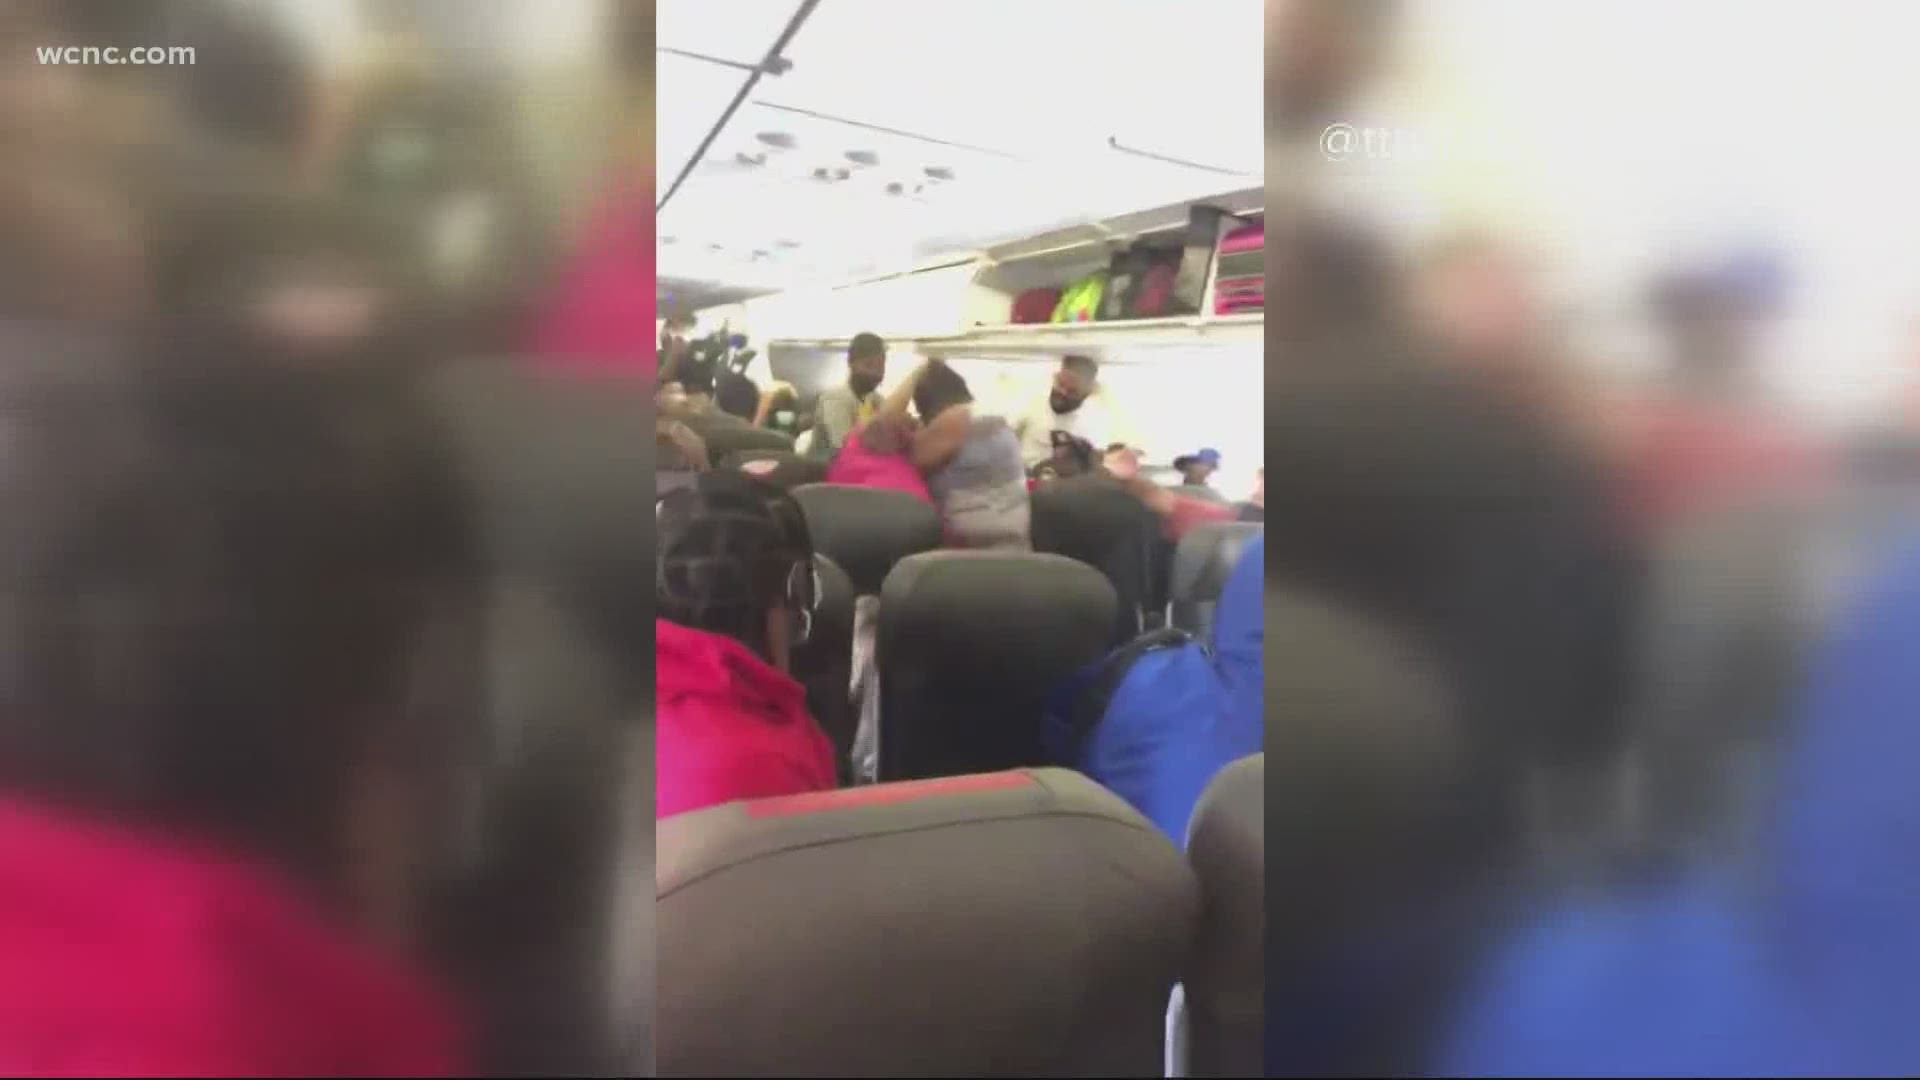 The plane was about to take off for Charlotte when passengers got into a fight over the airline's face mask policy.